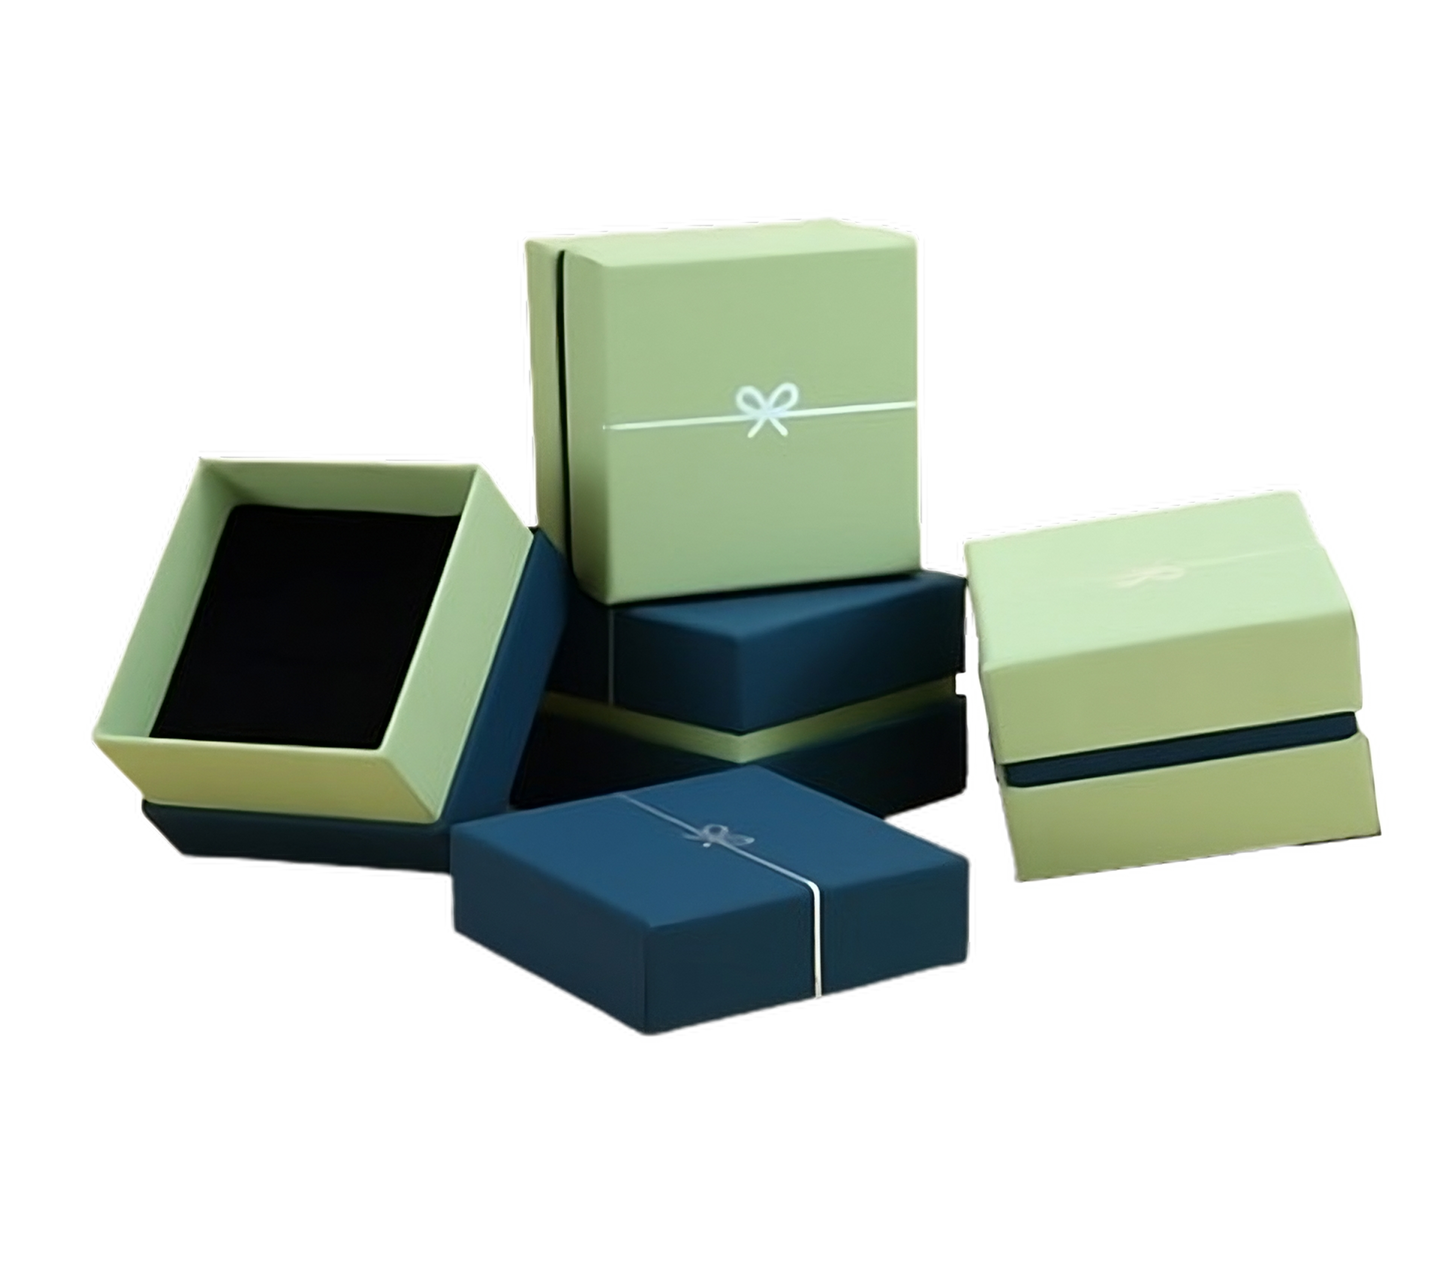 Tiny Bow Knot Packaging Boxes (10 pcs Per Pack)